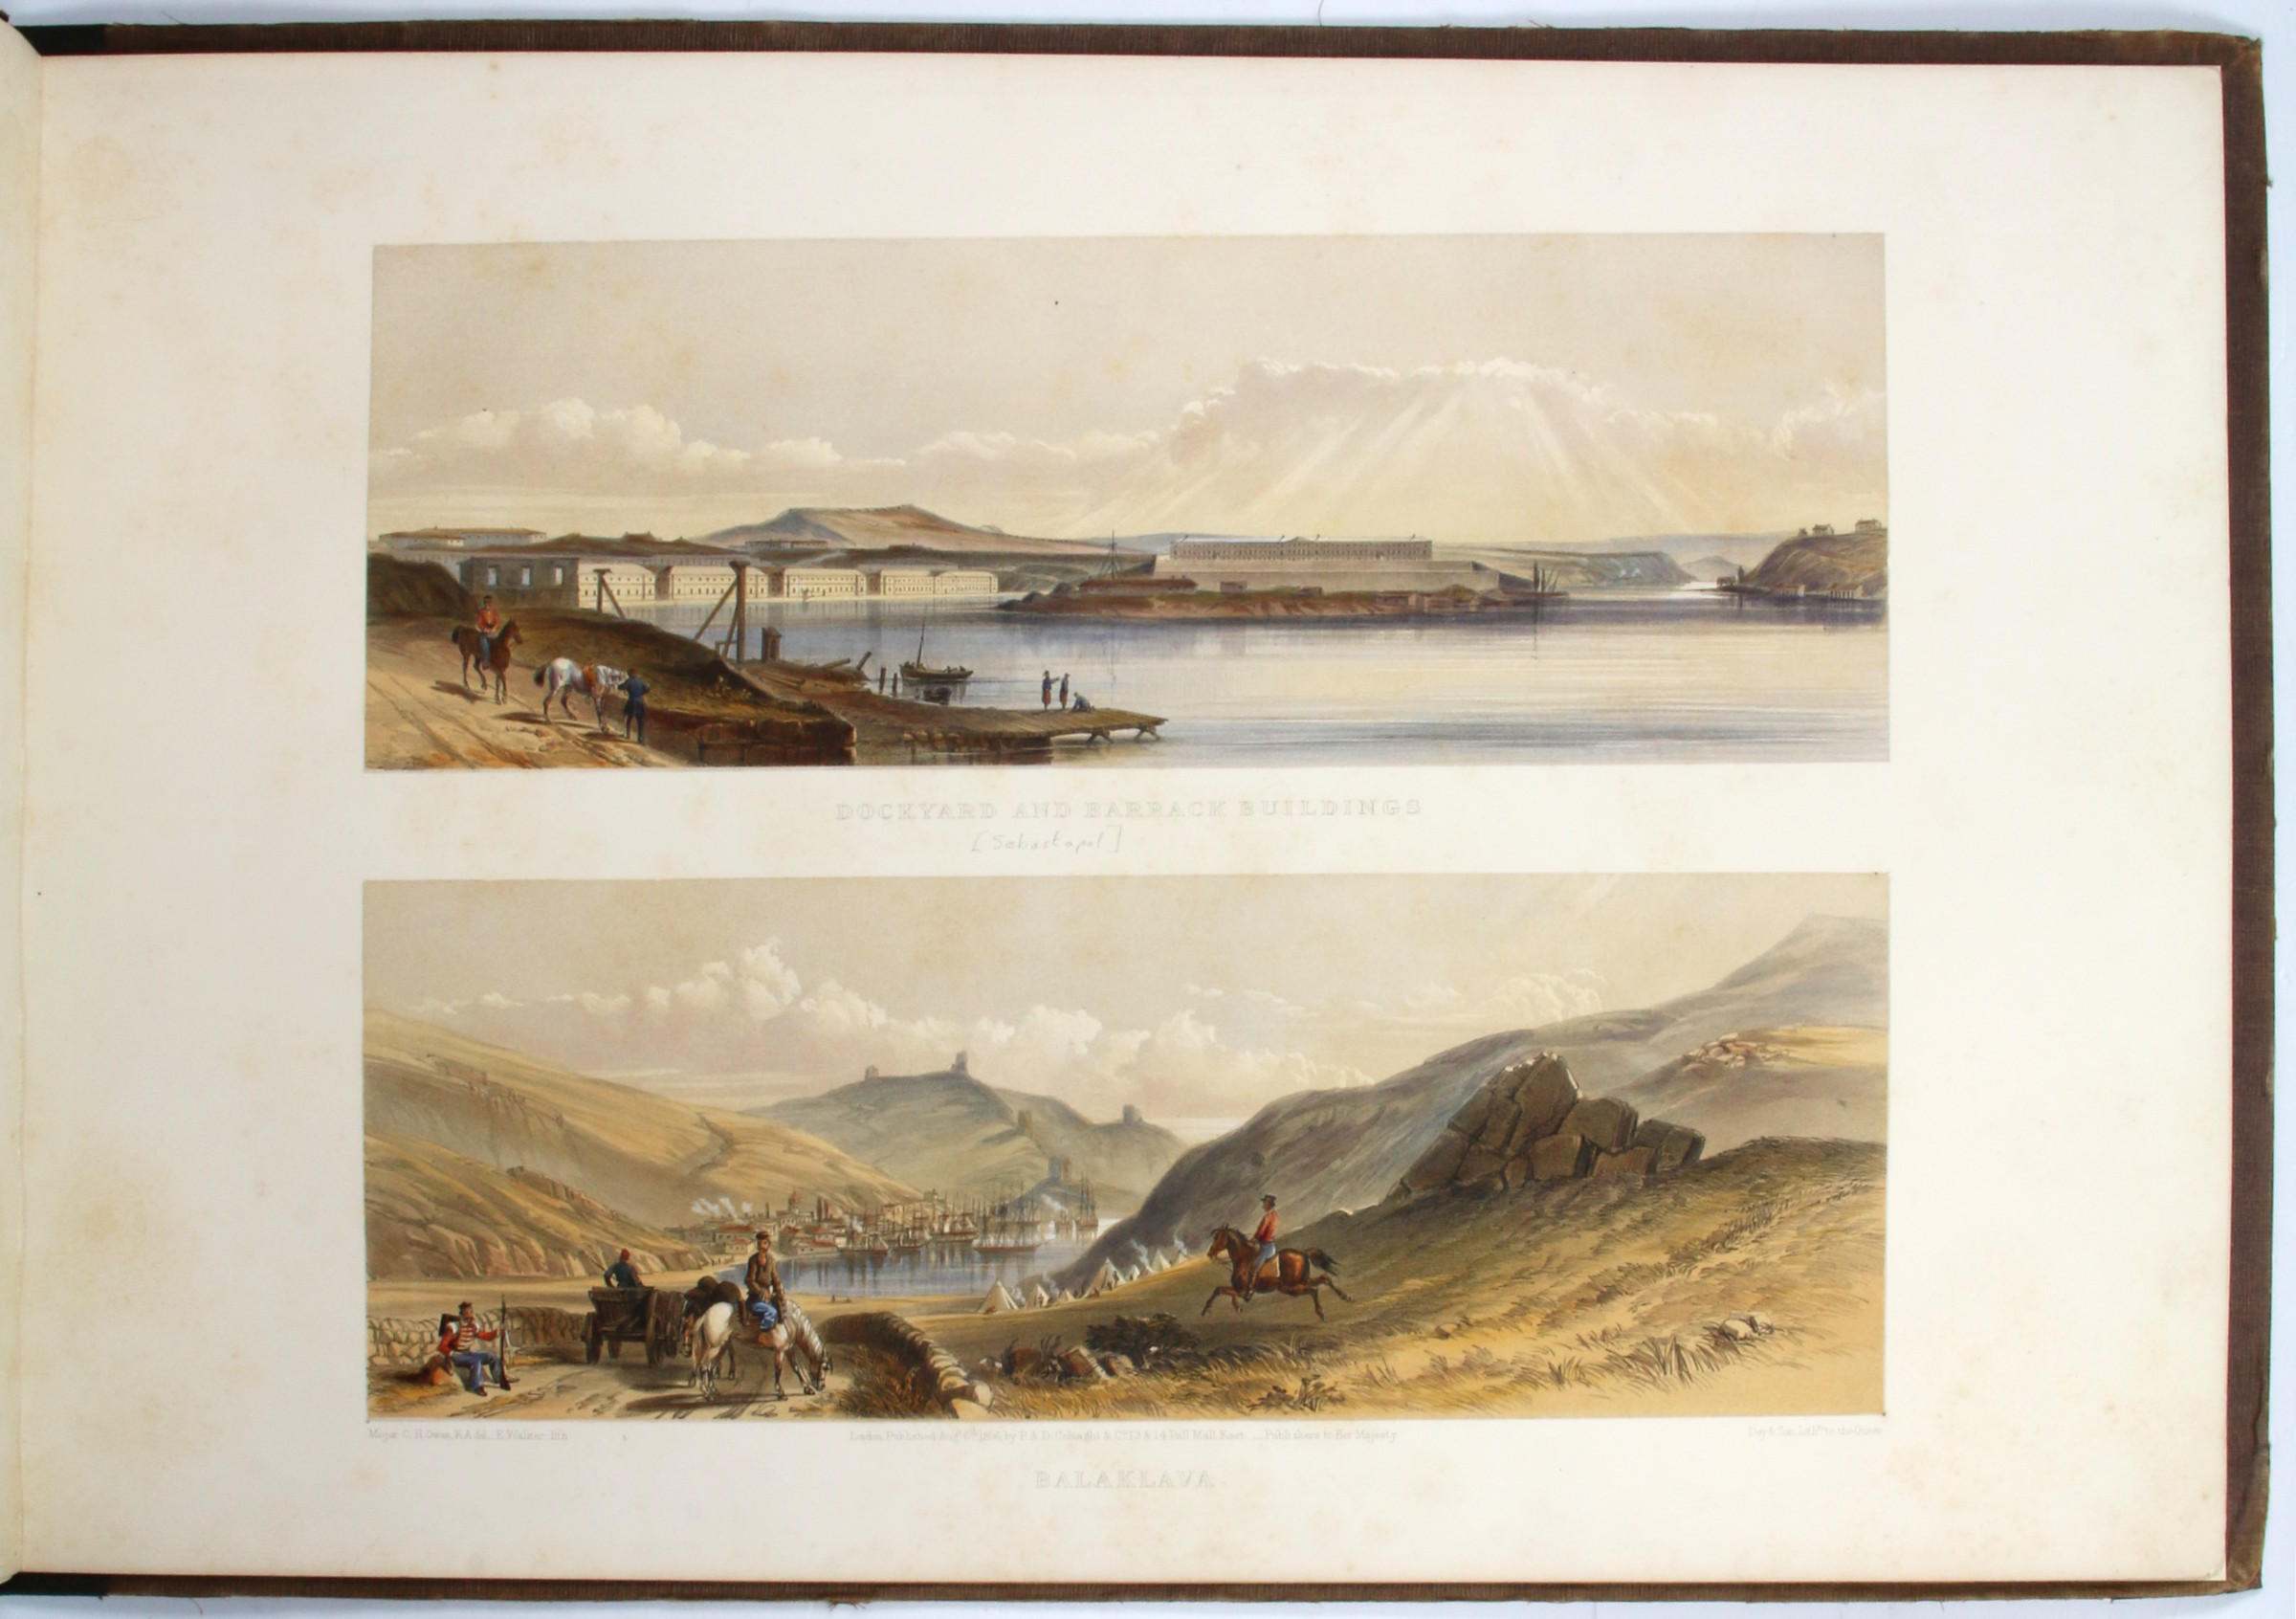 Owen, Charles Henry. Sketches in the Crimea, Taken During the Late War ...